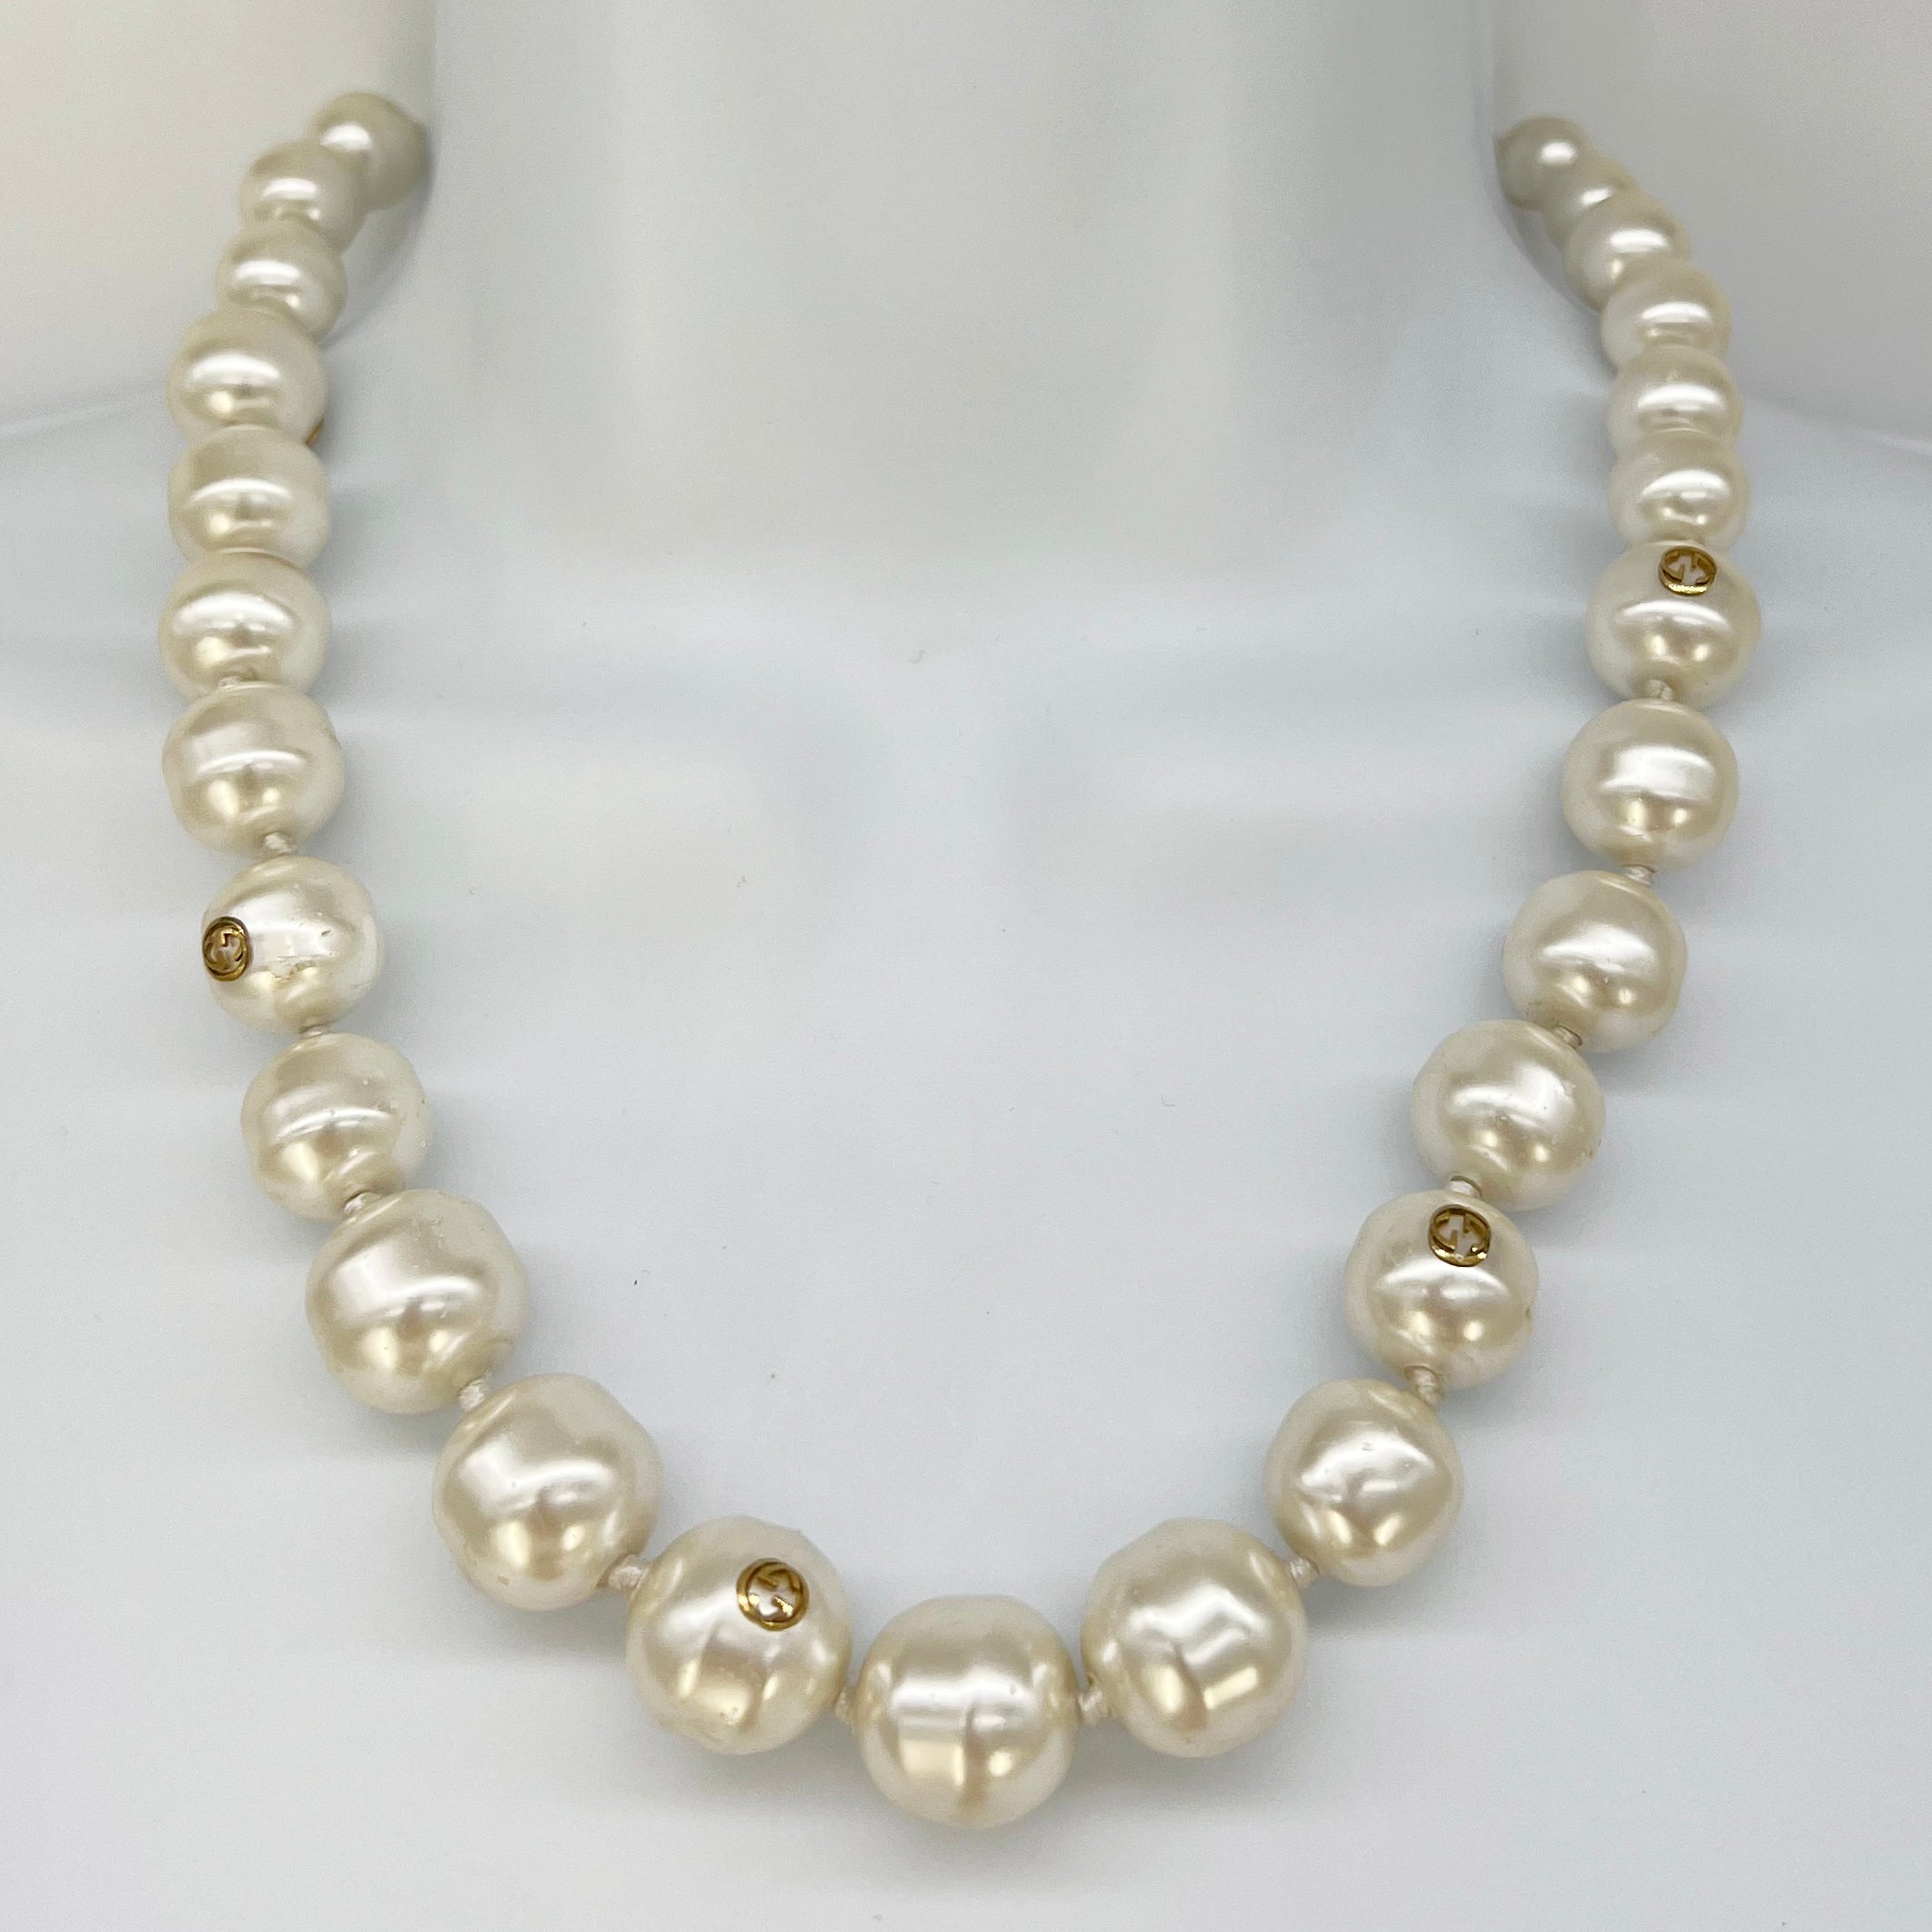 Guaranteed Authentic Gucci Faux Pearl Necklace with Ribbon with Feline Head Appx 10